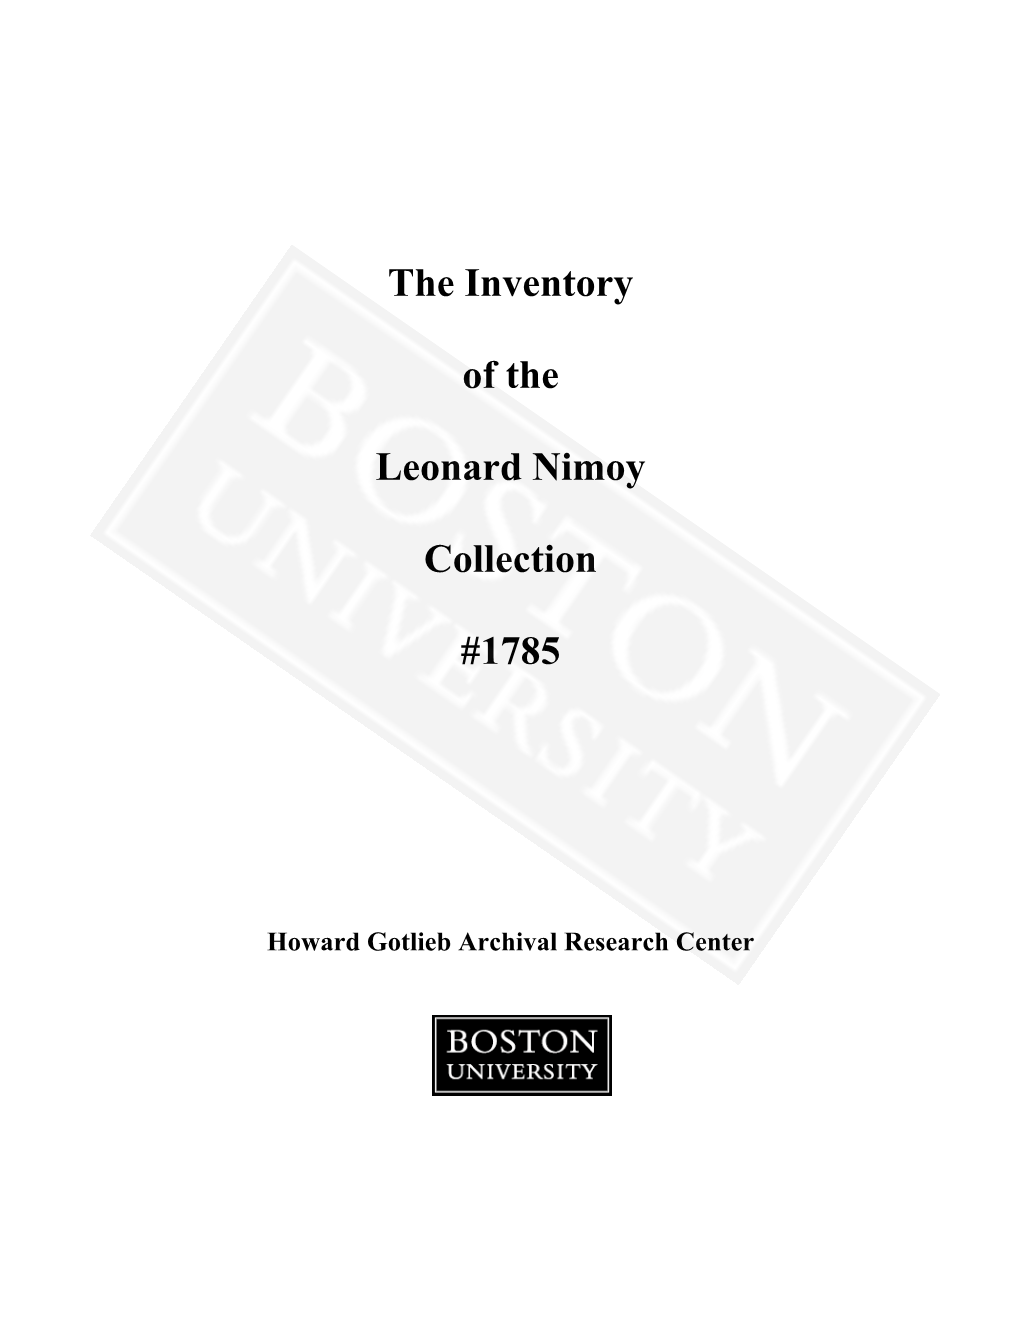 The Inventory of the Leonard Nimoy Collection #1785